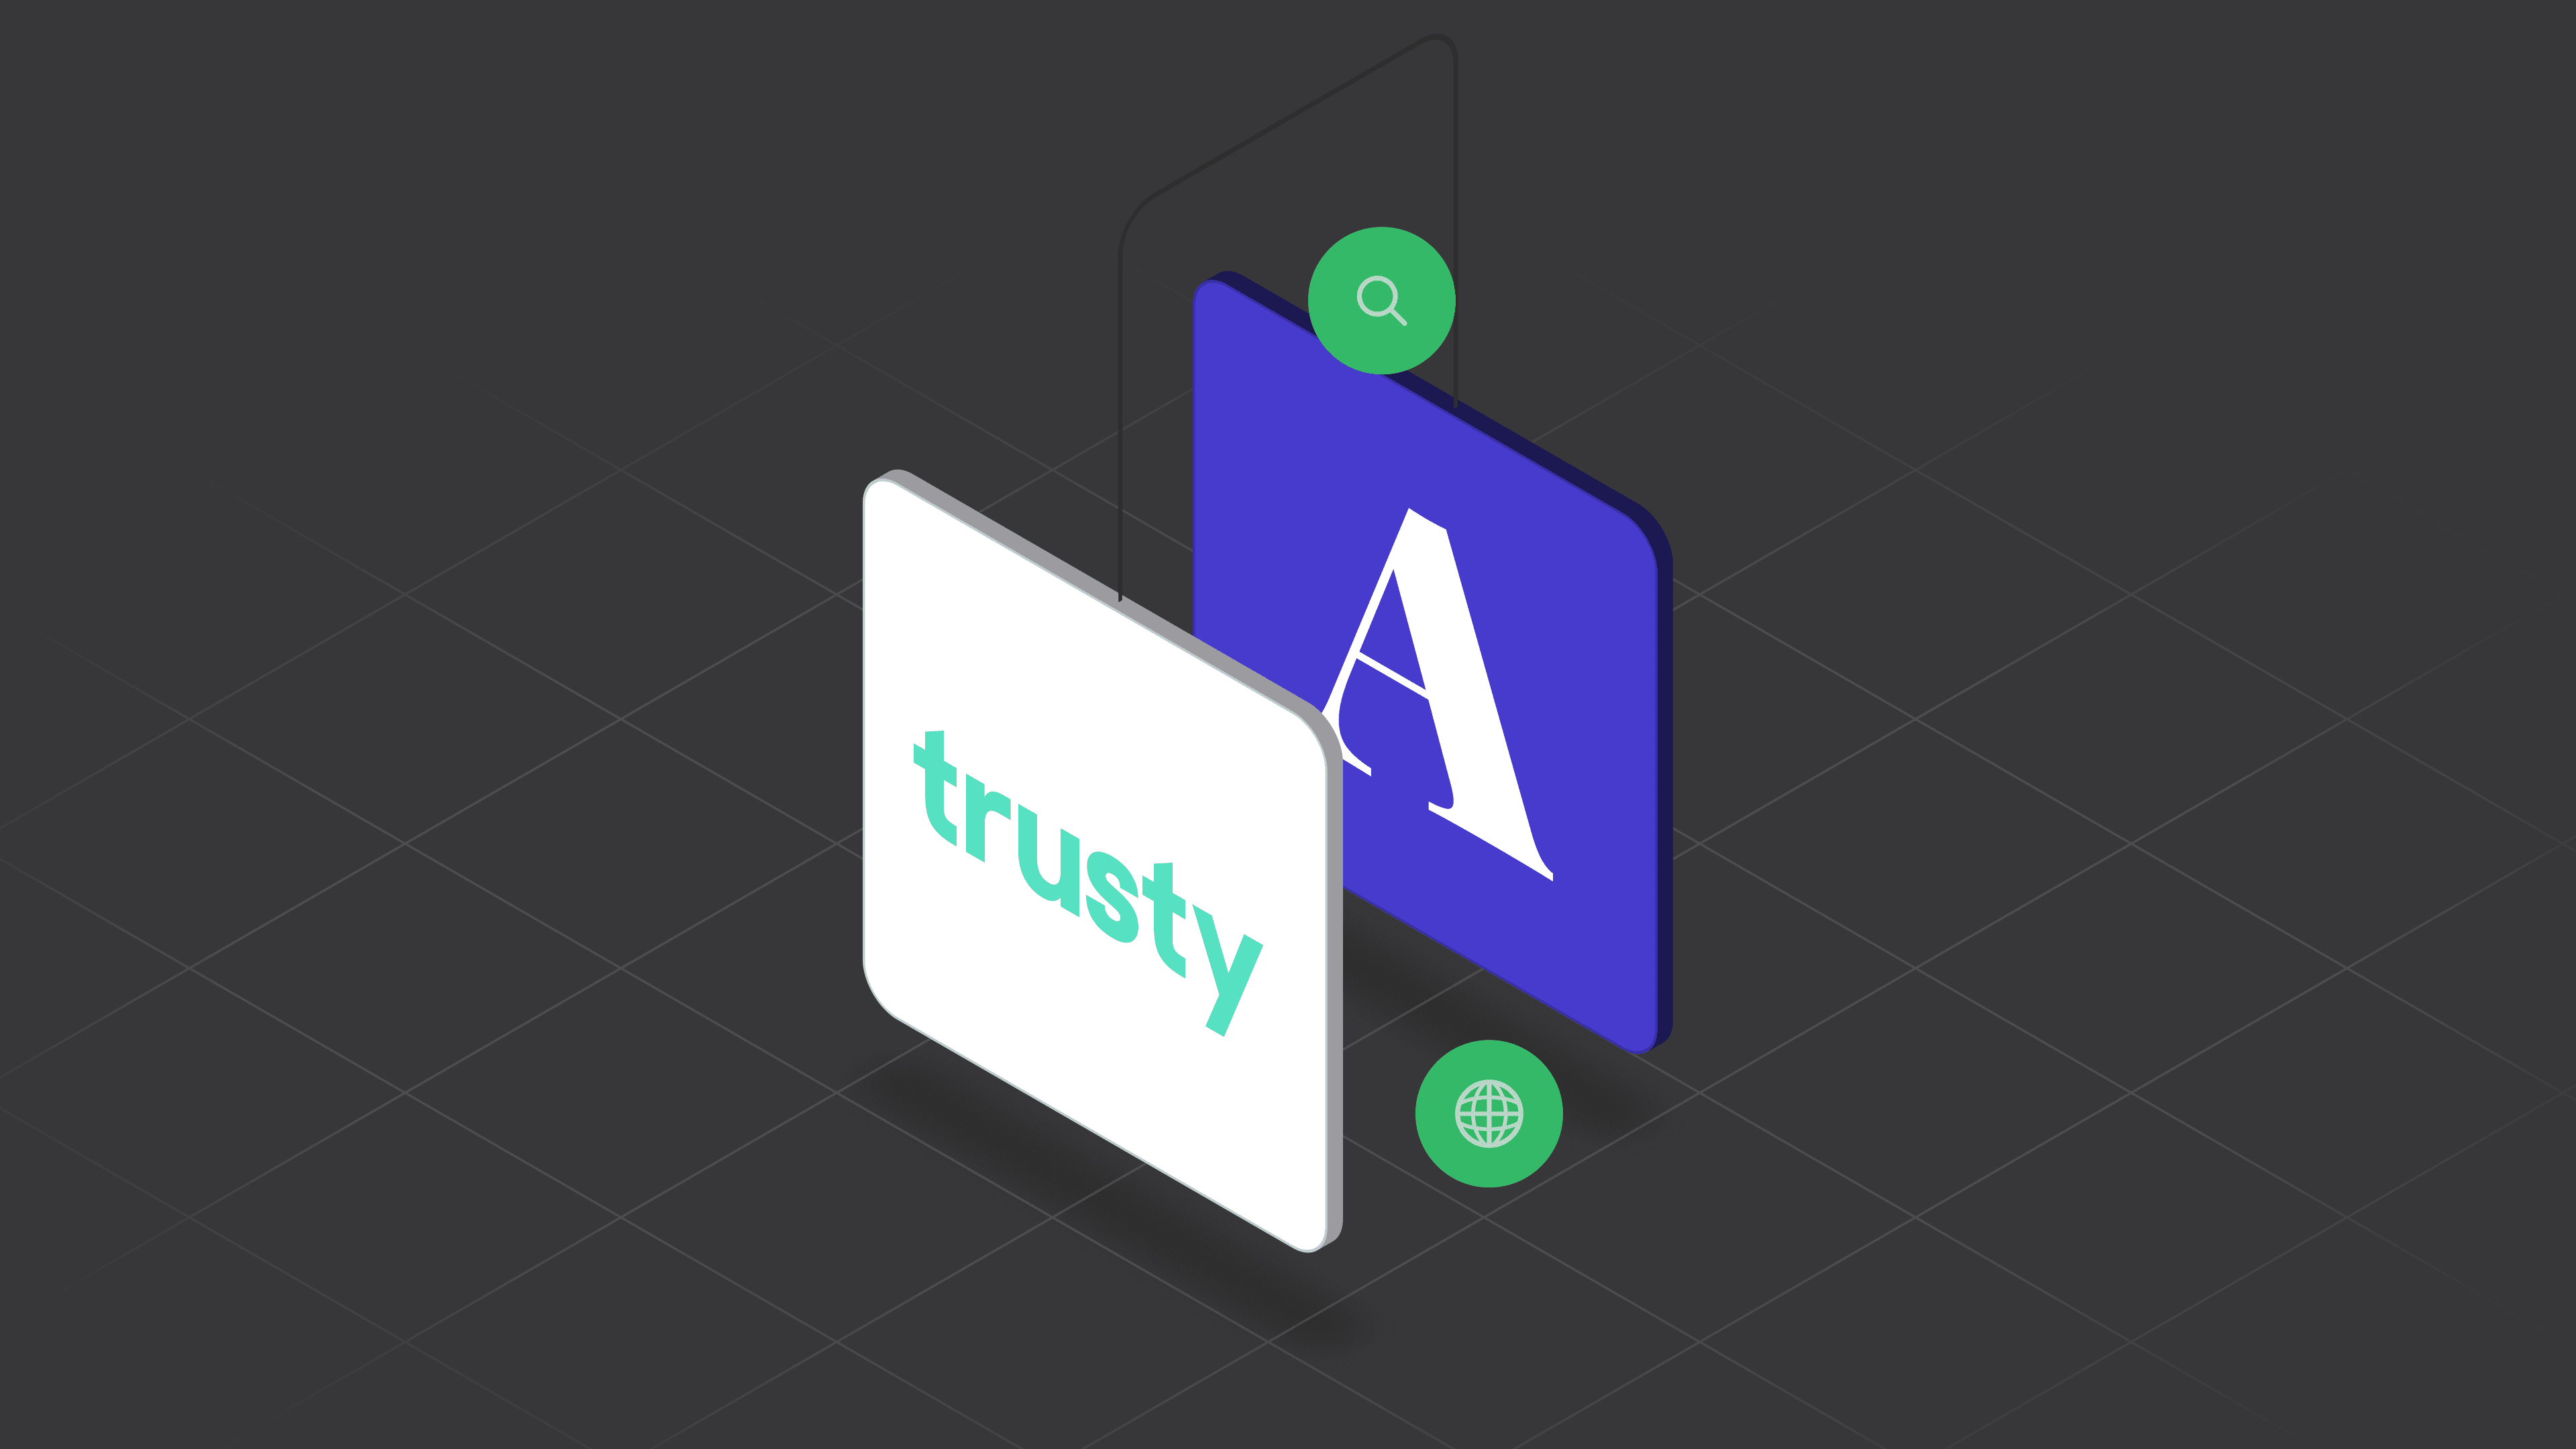 Ashby partners with Trusty to empower your team to refer the best-fit future hires